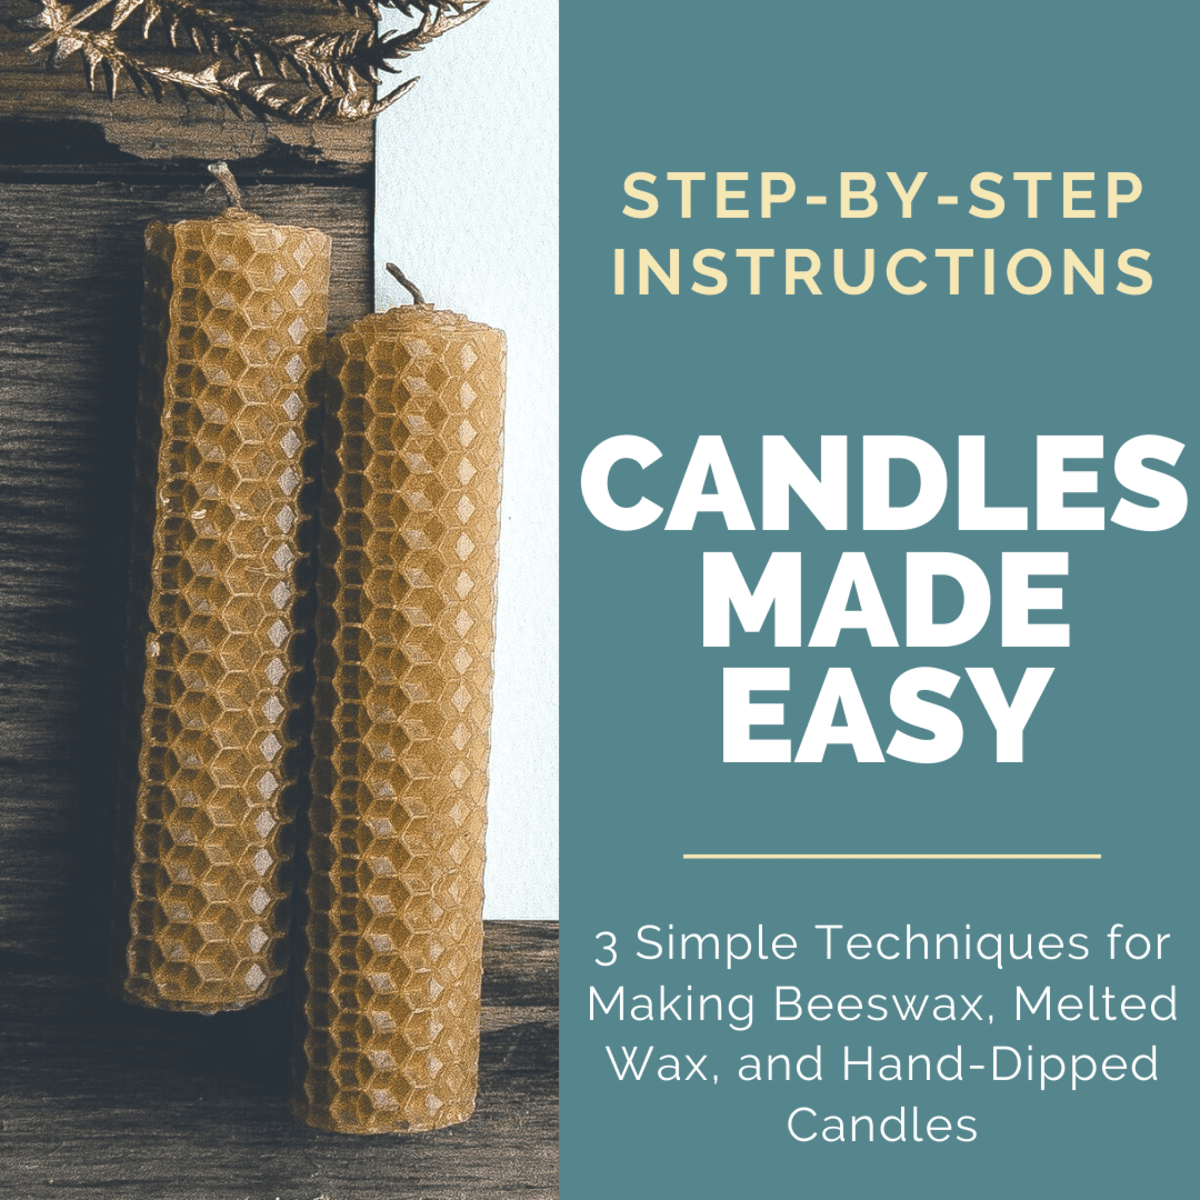 Quick and Easy Beeswax Candle Recipe for Beginners - The From